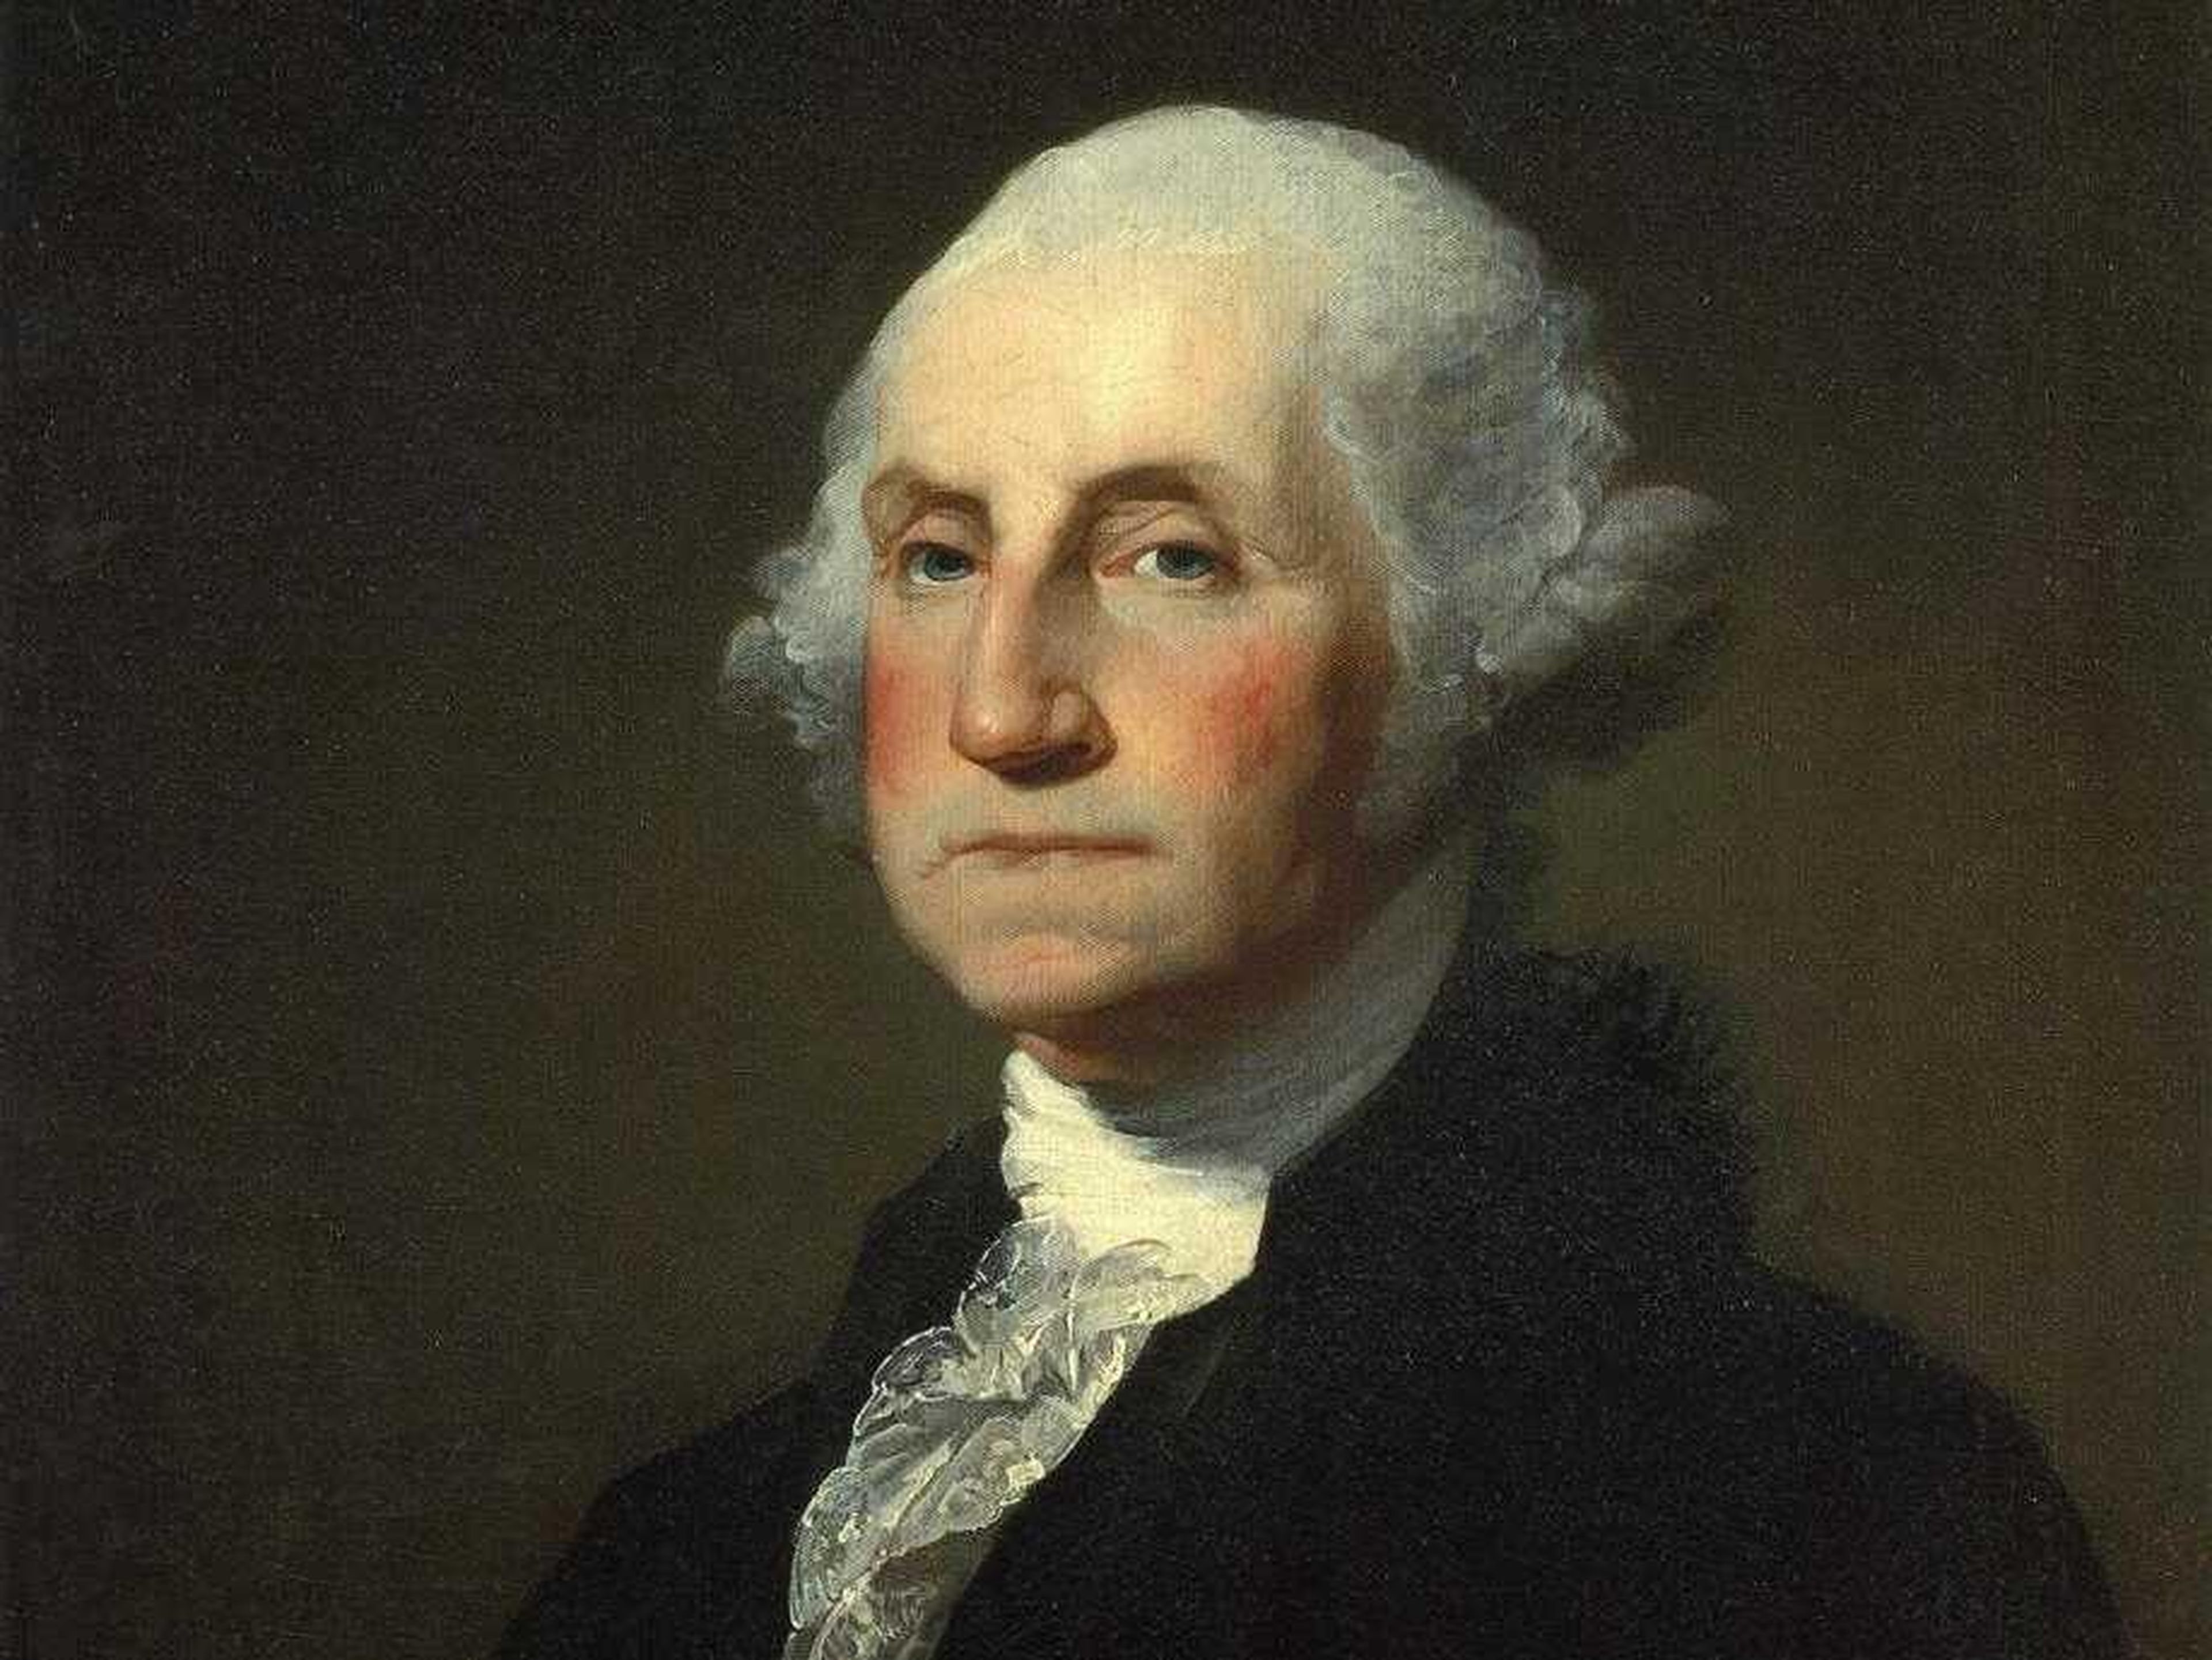 George Washington is said to have a recipe for beer.